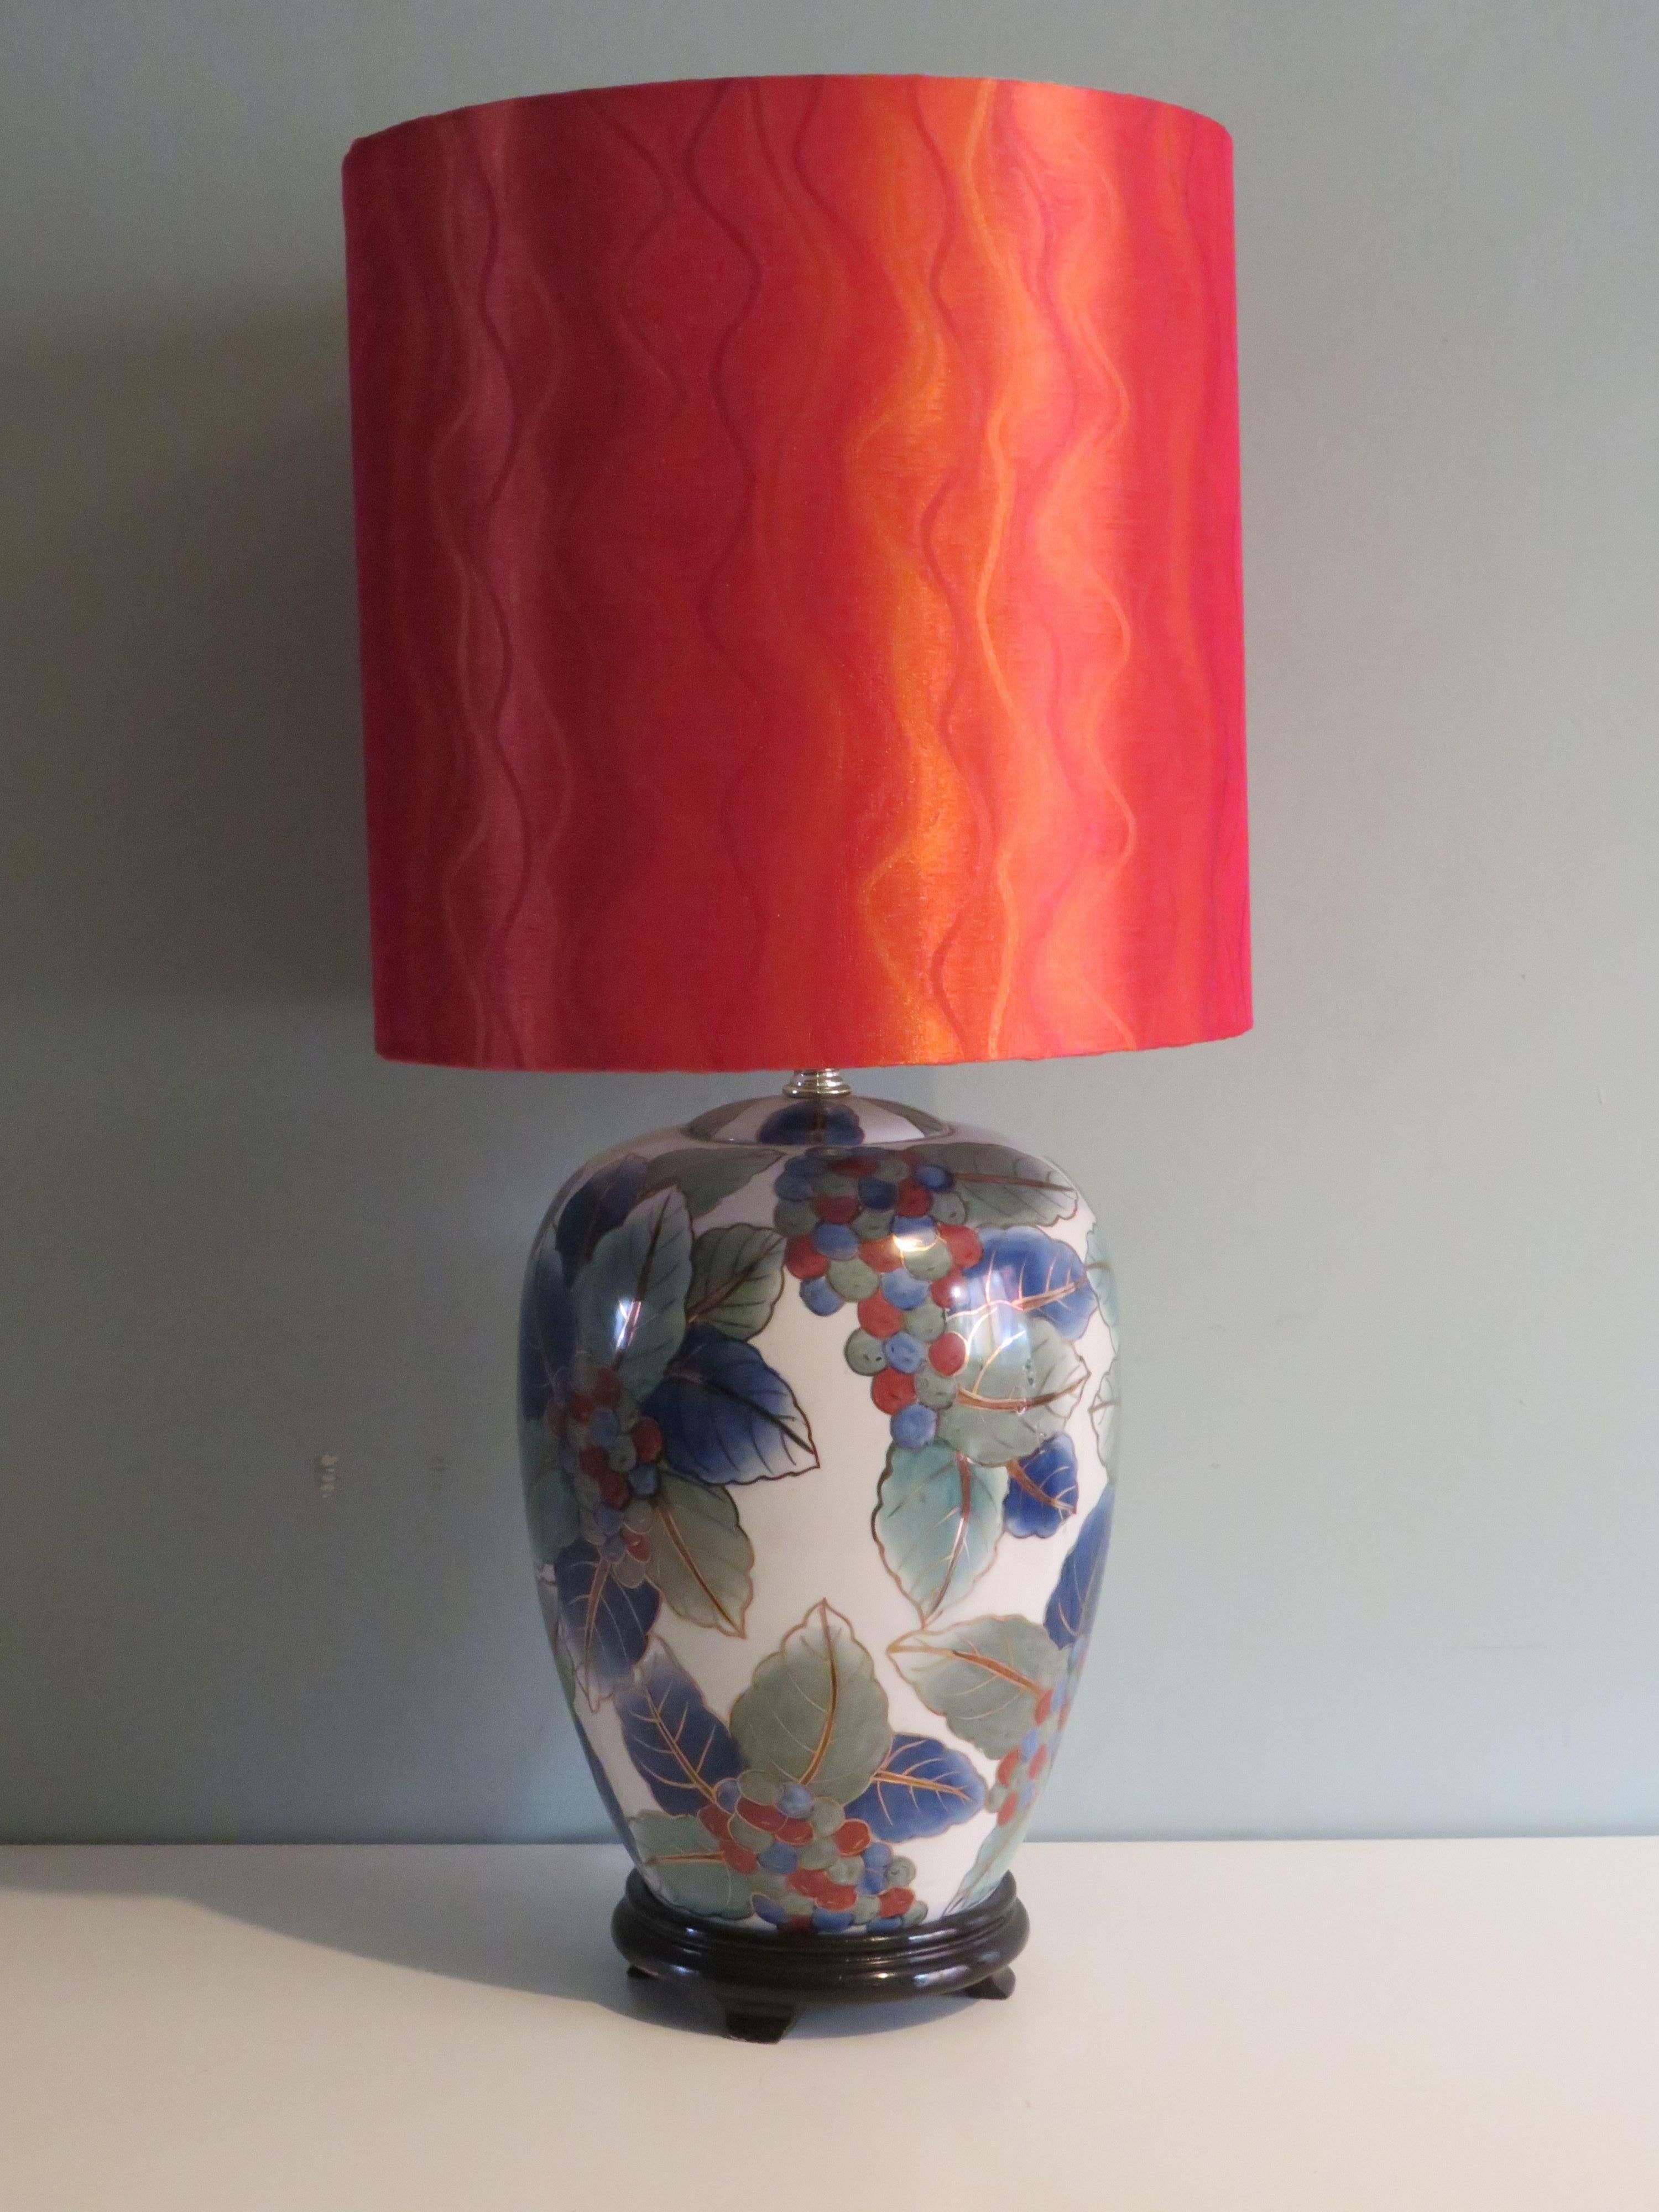 This beautiful table lamp features a leaf and berry motif in blue, green and orange-brown tones finished with a gold rim on a white background. The lamp base is mounted on a black wooden base.
The vintage lamp base is equipped with a new,